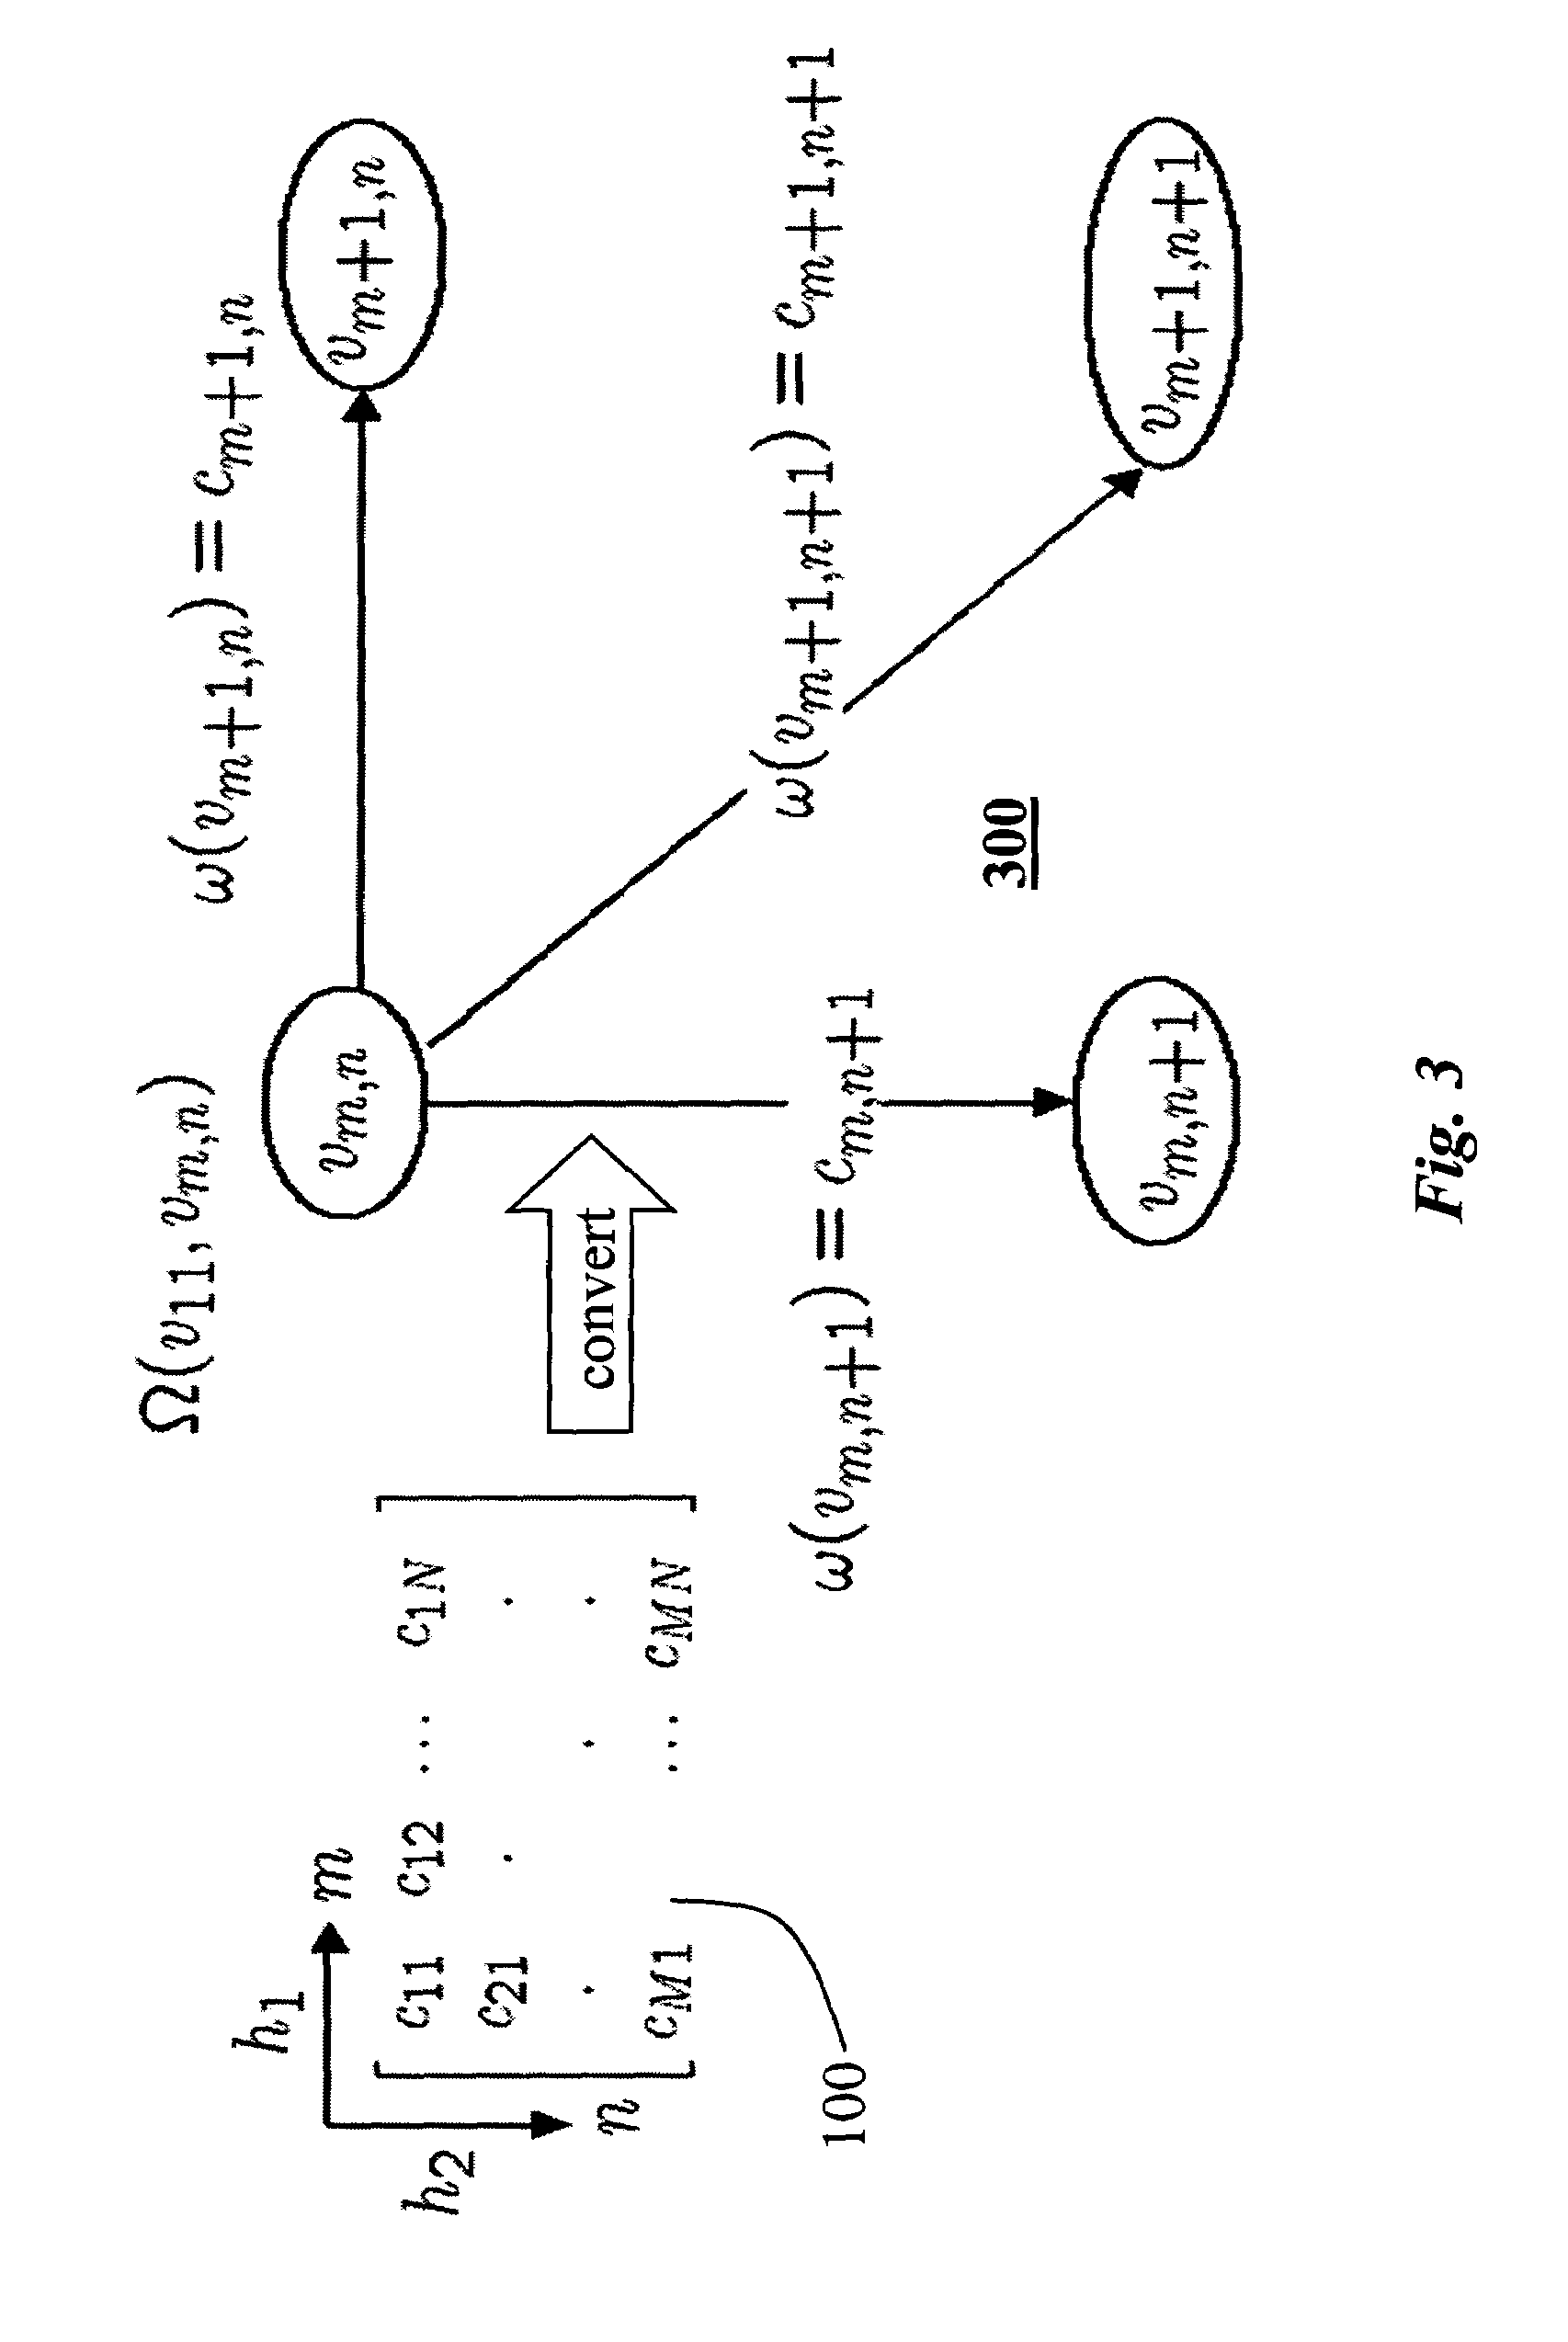 Method for determining similarities between data sequences using cross-correlation matrices and deformation functions